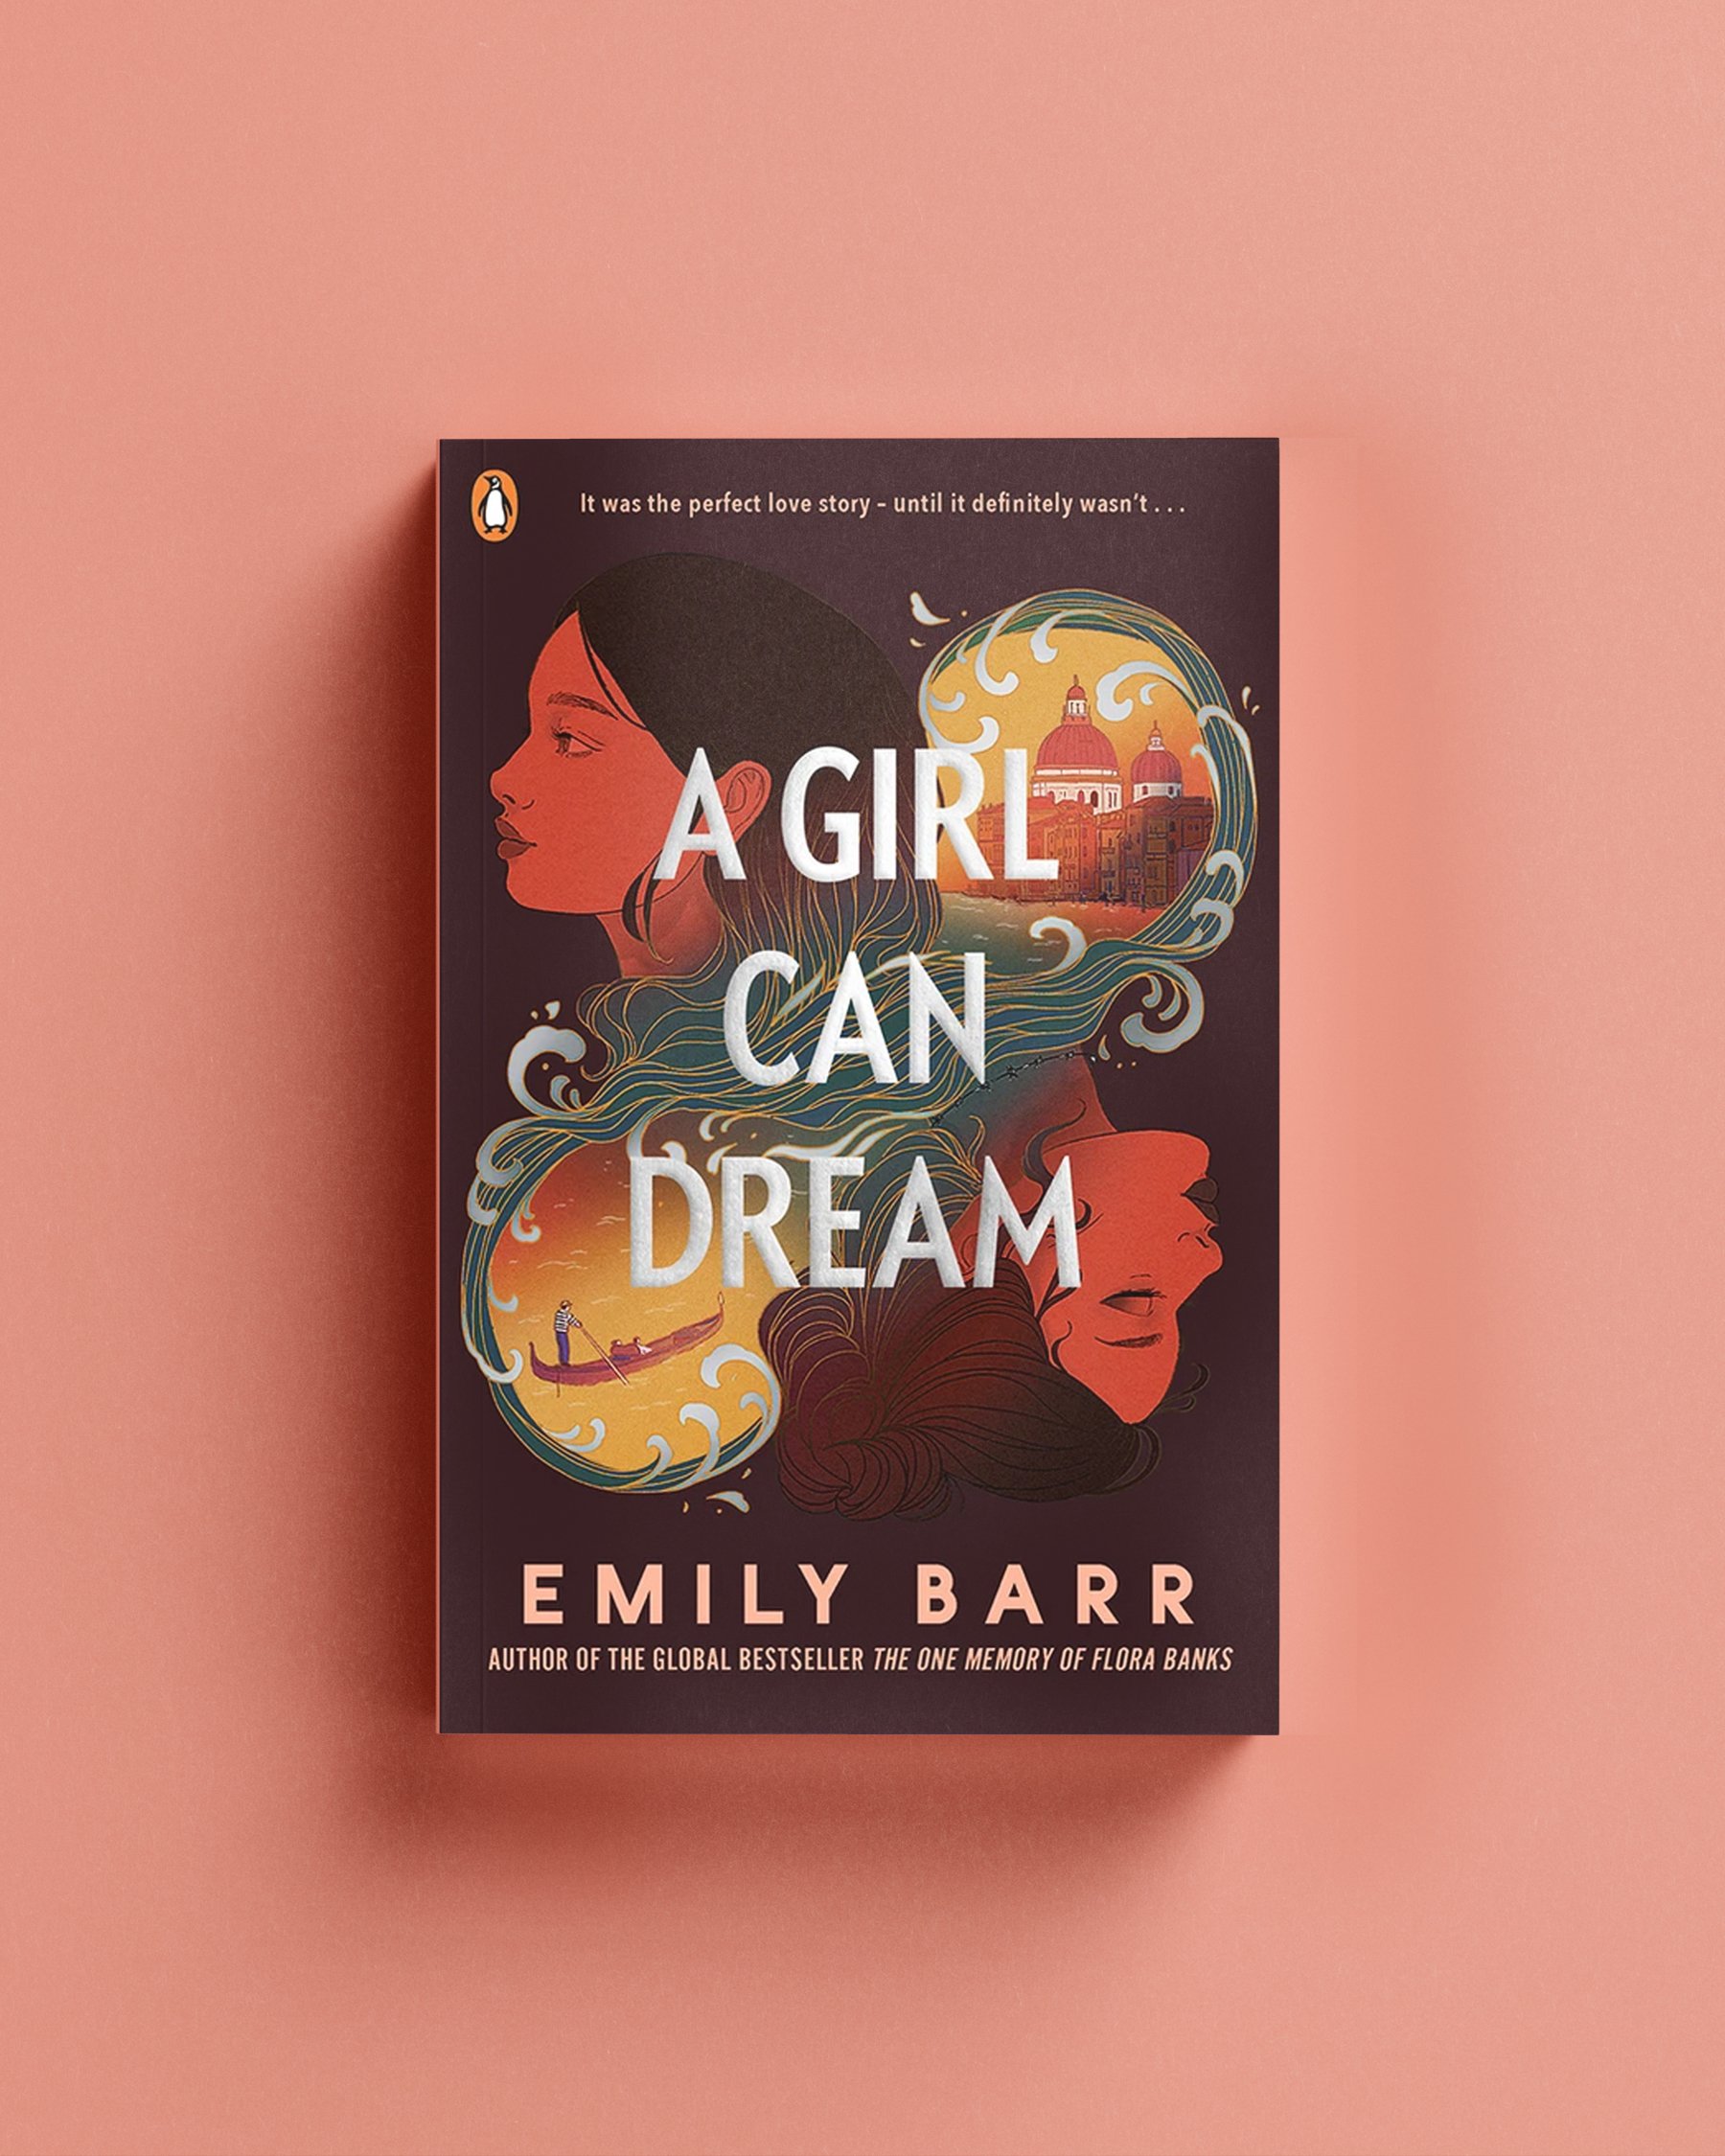 Cover for "A girl can dream" by Emily Barr 